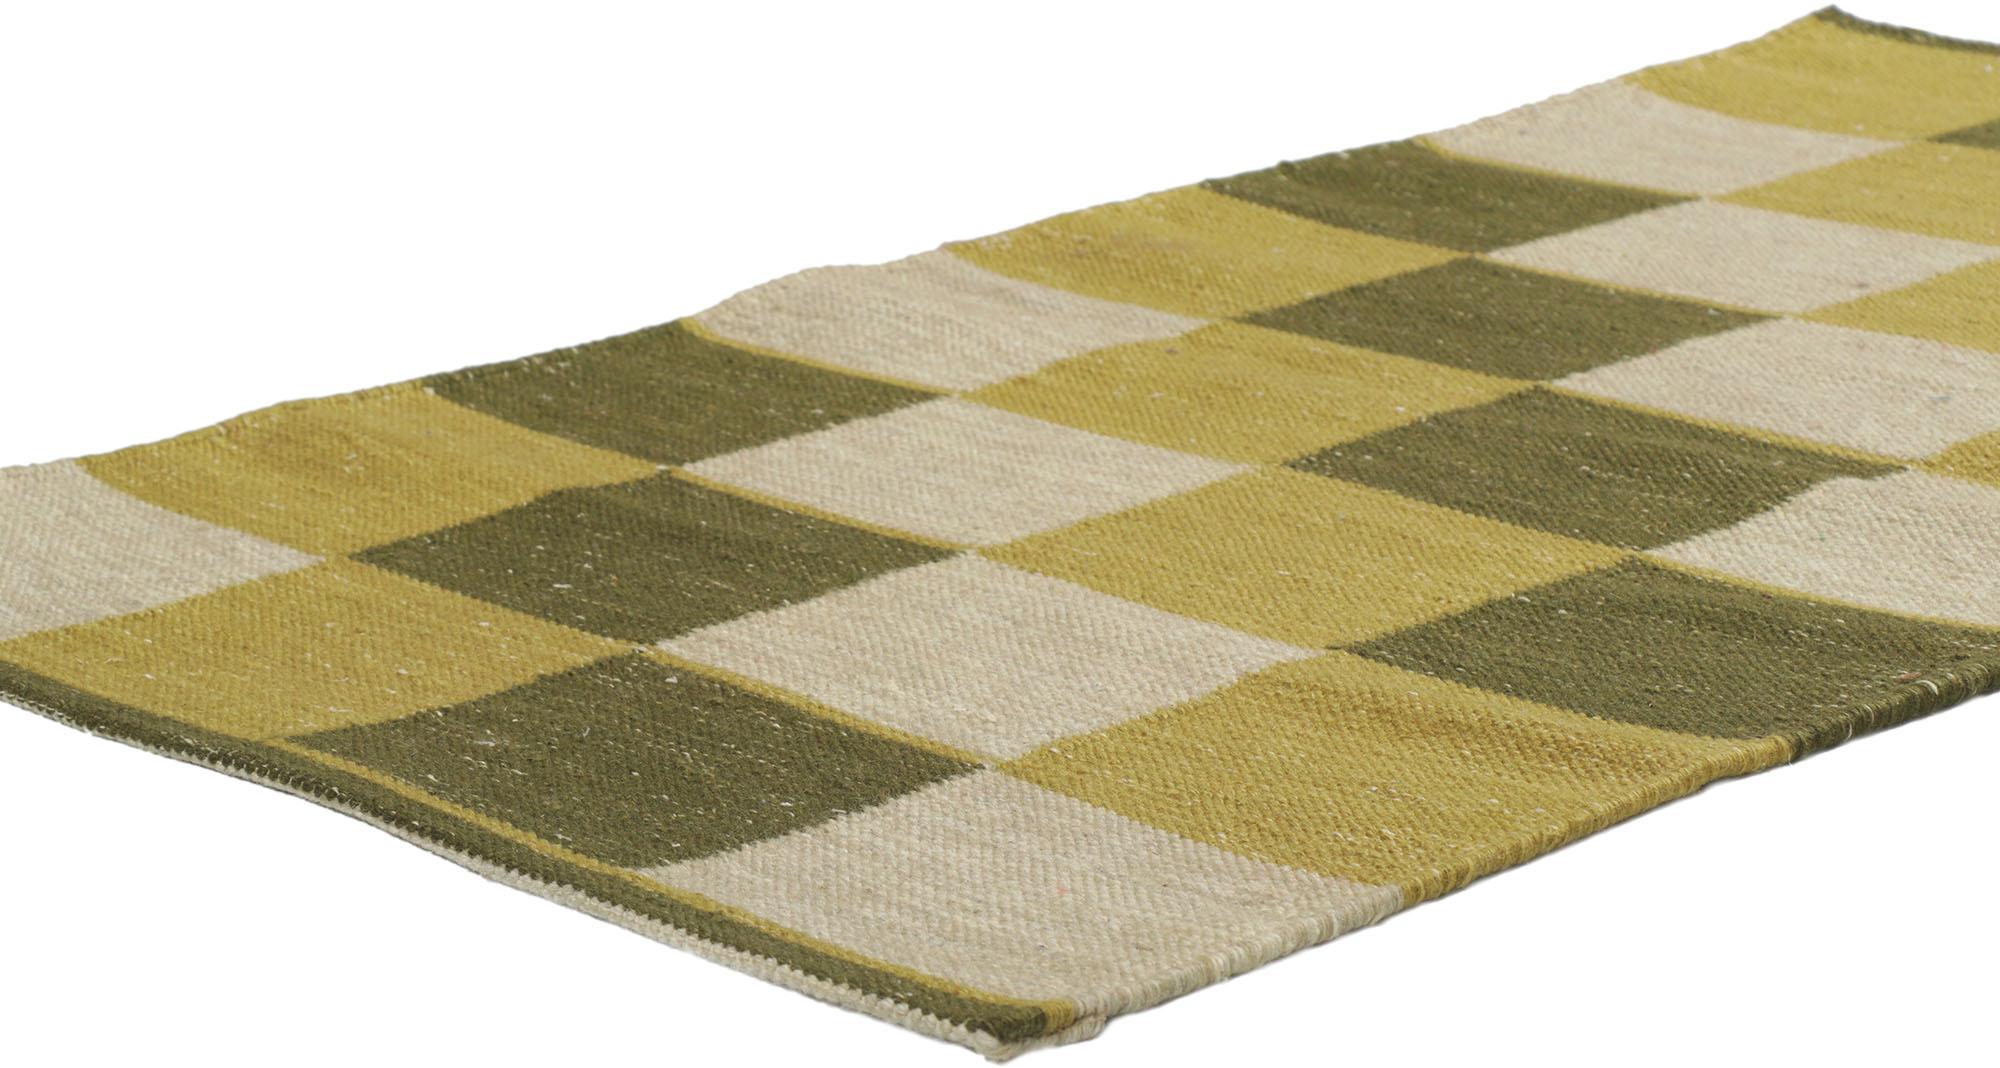 30704 New Swedish inspired Kilim rug with Scandinavian Modern style 02'11 x 04'10. With its geometric design and bohemian hygge vibes, this hand-woven wool Swedish inspired Kilim rug beautifully embodies the simplicity of Scandinavian modern style.